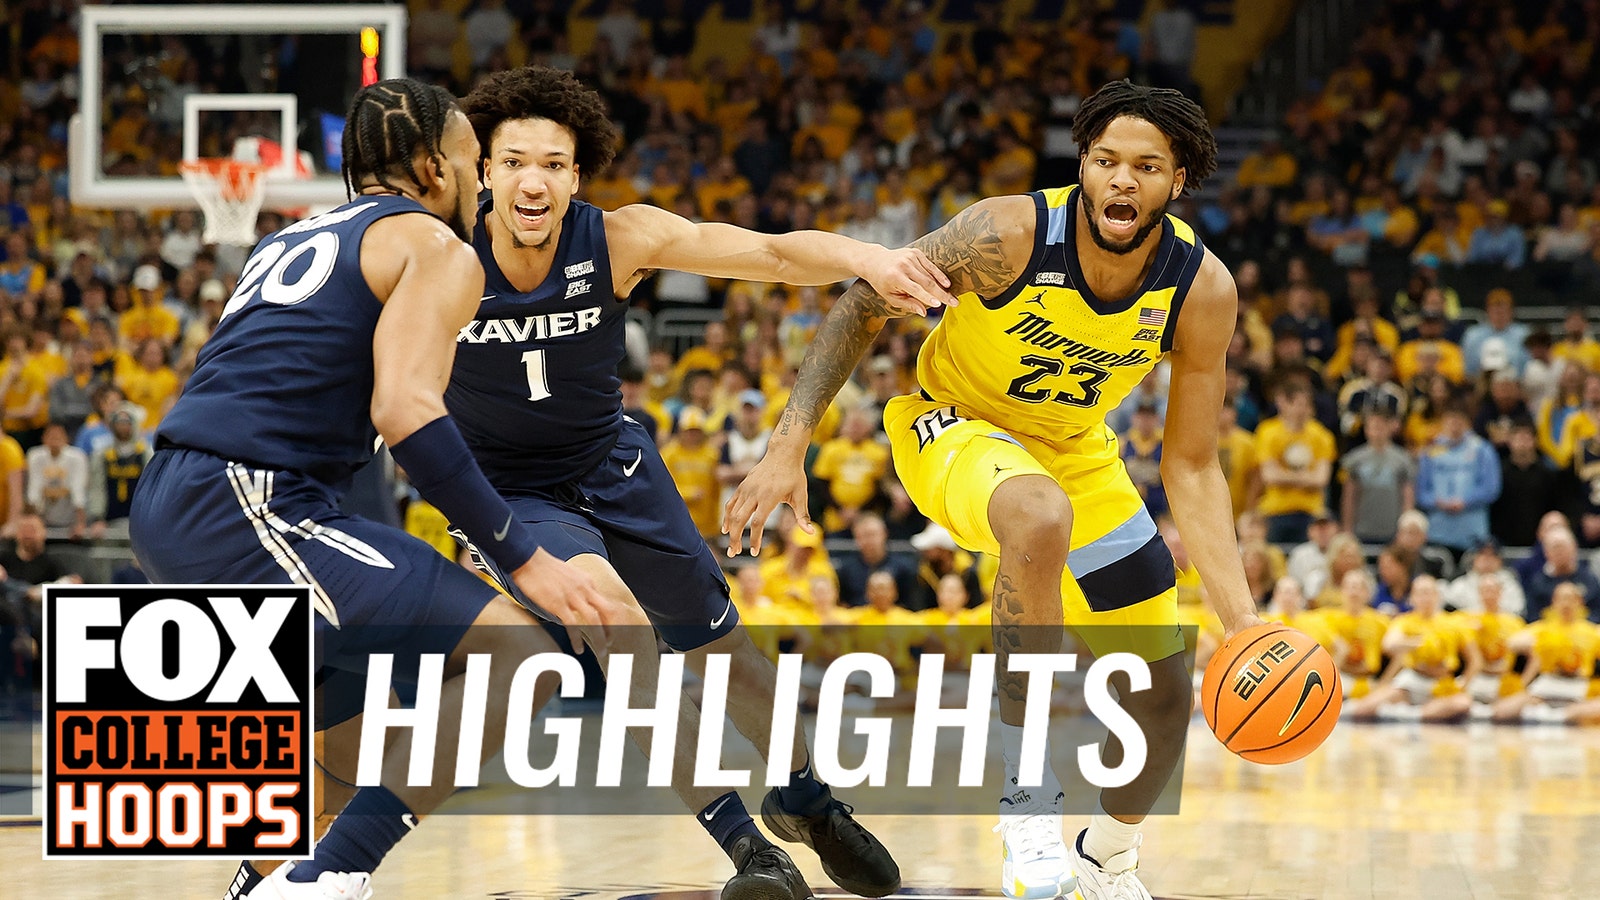 Xavier Musketeers vs. No. 7 Marquette Golden Eagles Highlights